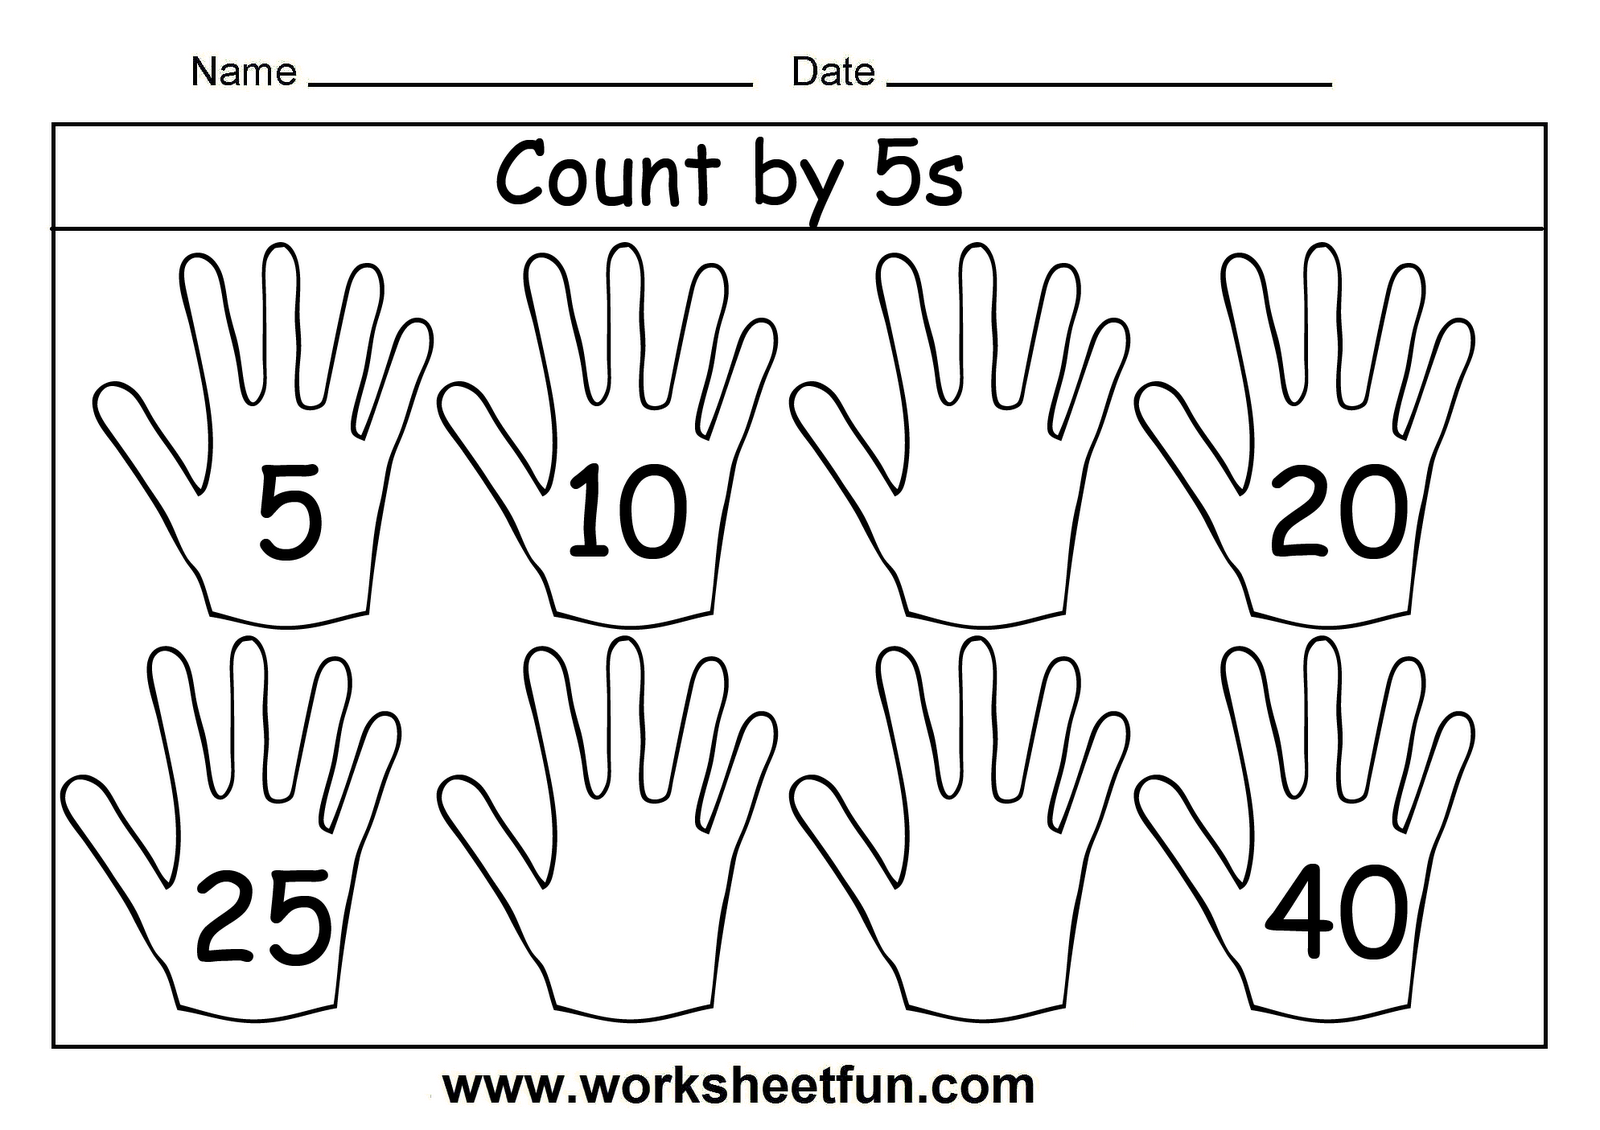 18 Best Images of Skip Count By Fives Worksheet Counting By 5S